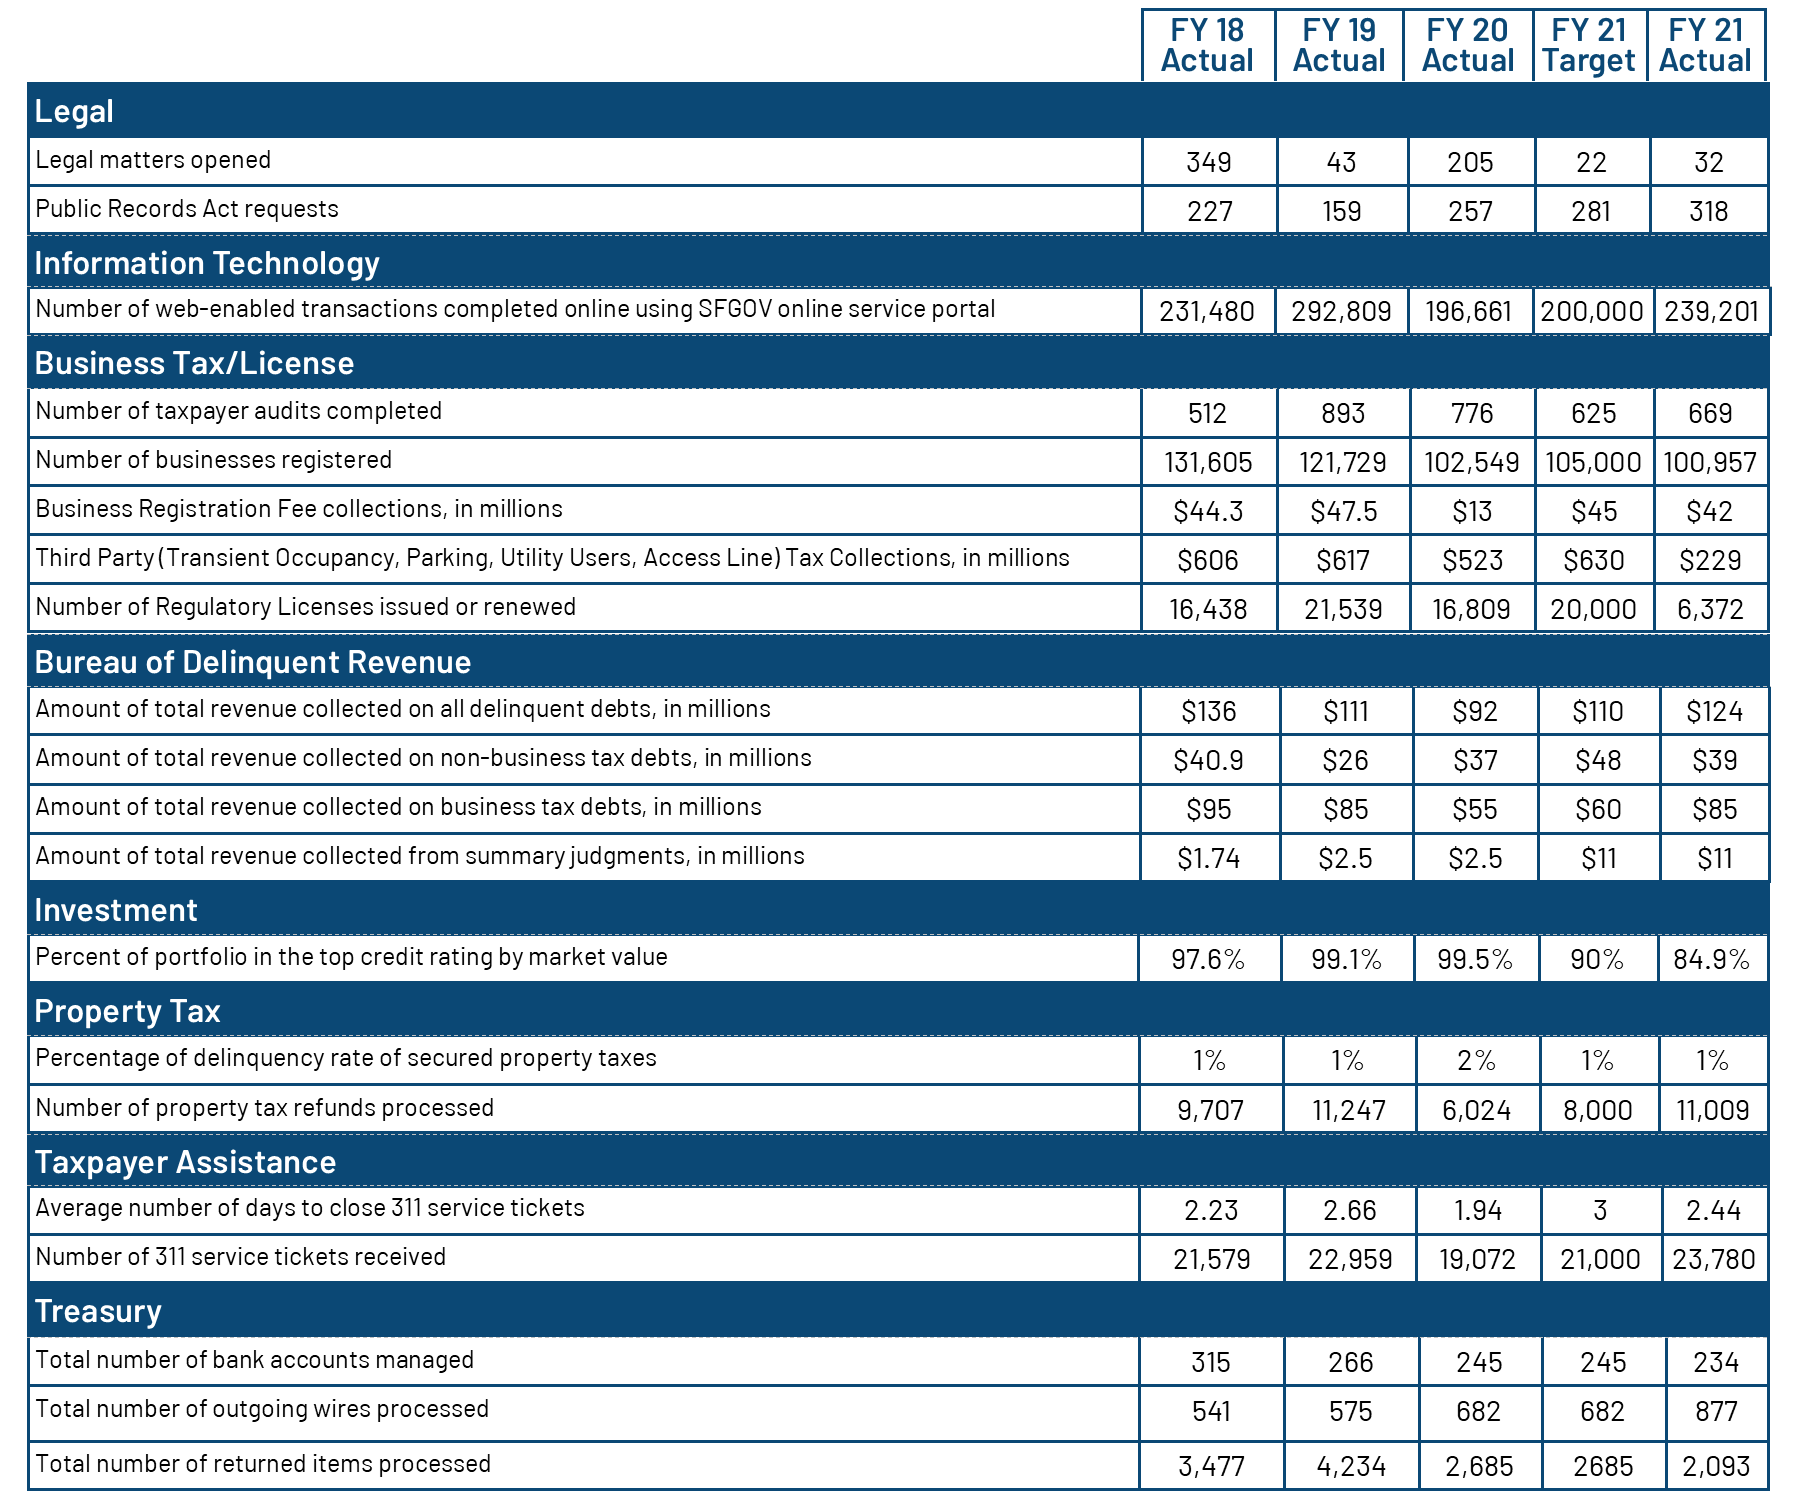 FY 20-21 Performance measures